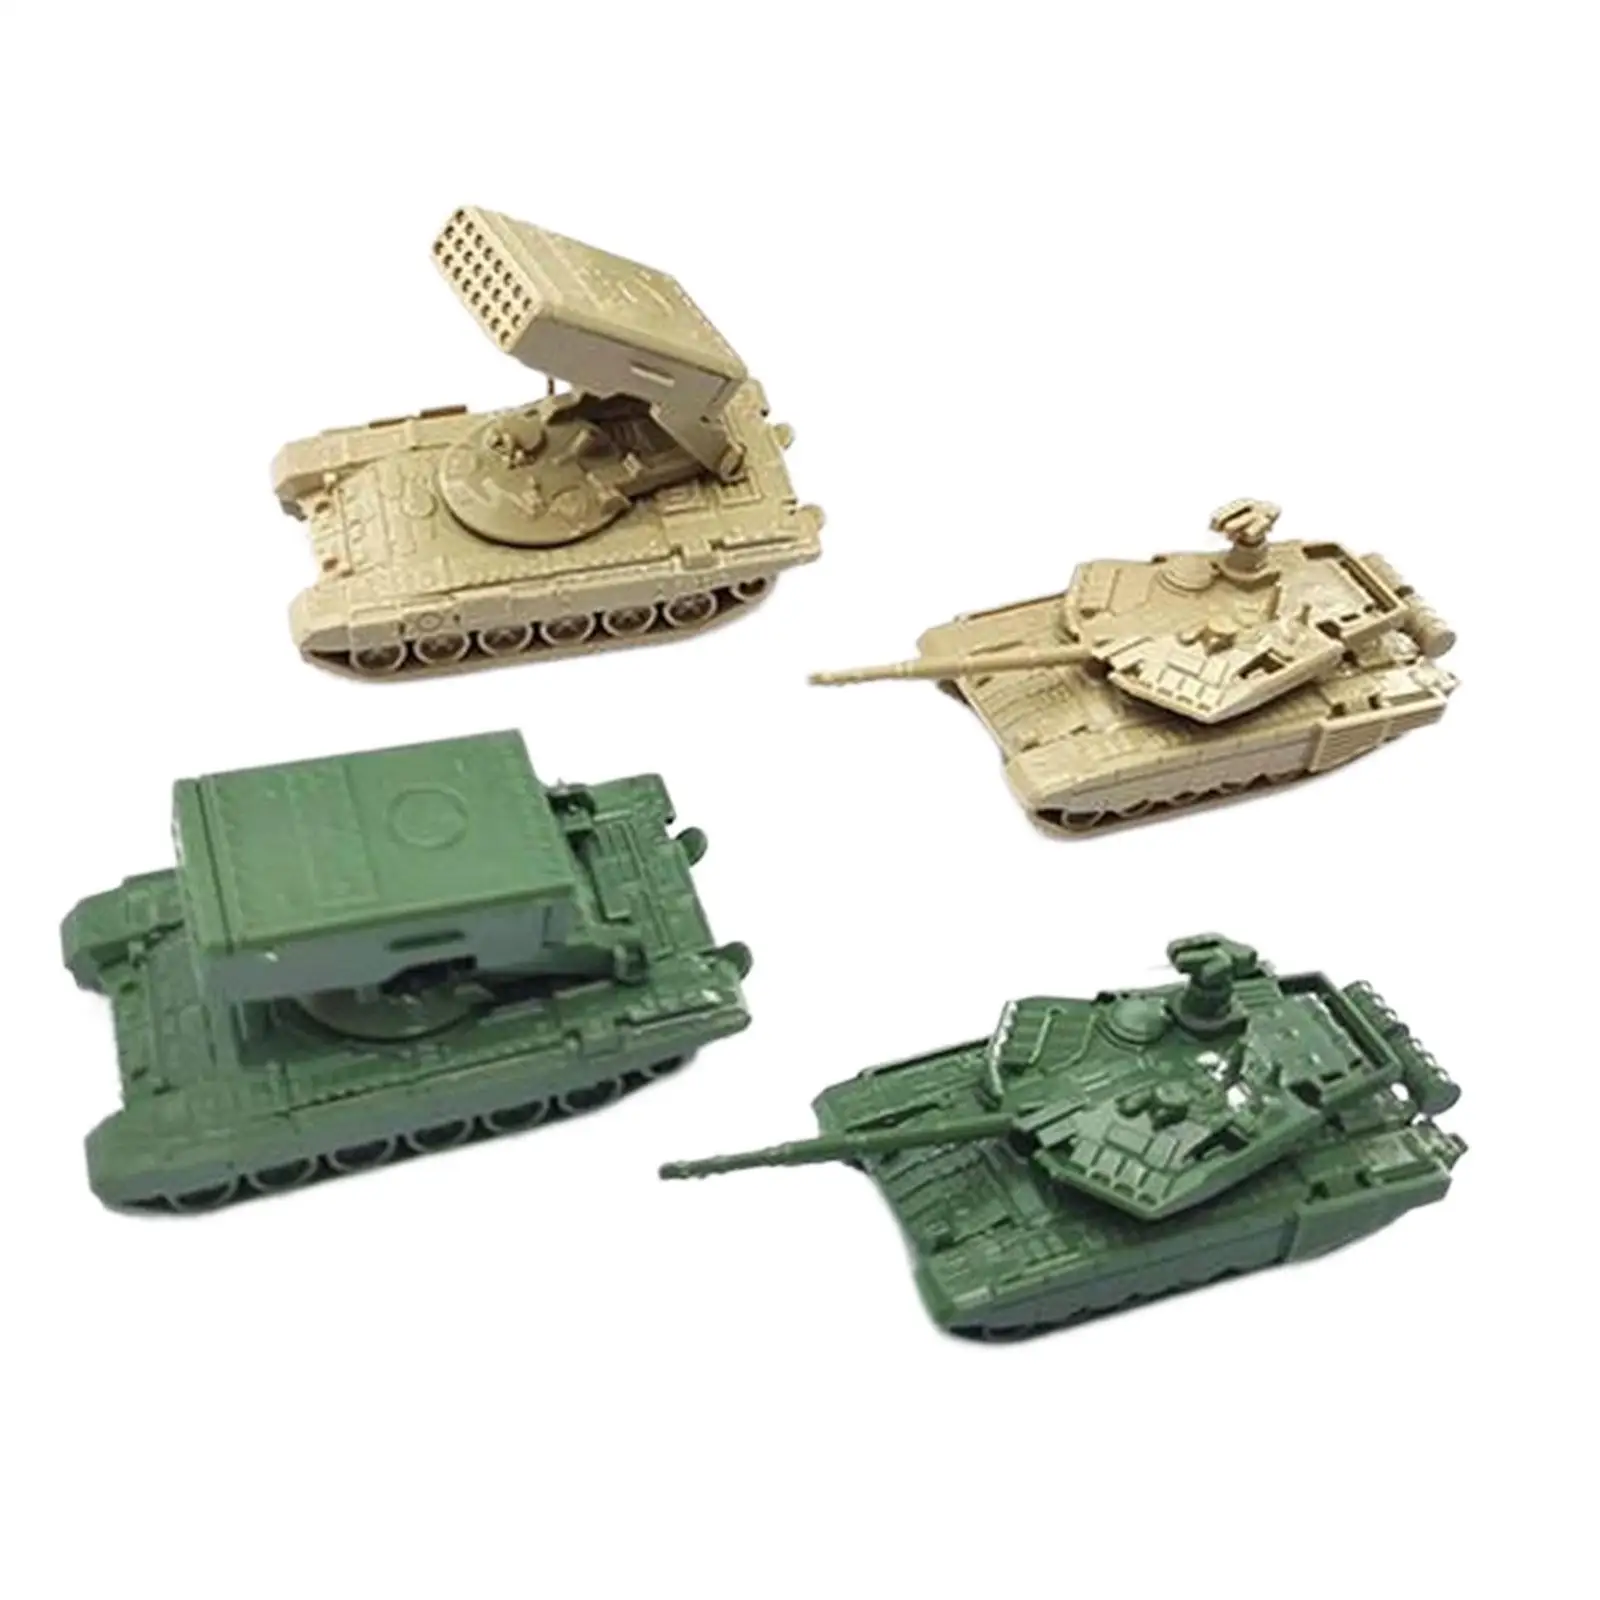 

4x 1/144 Tank Rocket Launchers Model Party Favors Simulation Vehicle Model Toy Mini Tank Vehicles for Birthday Gifts